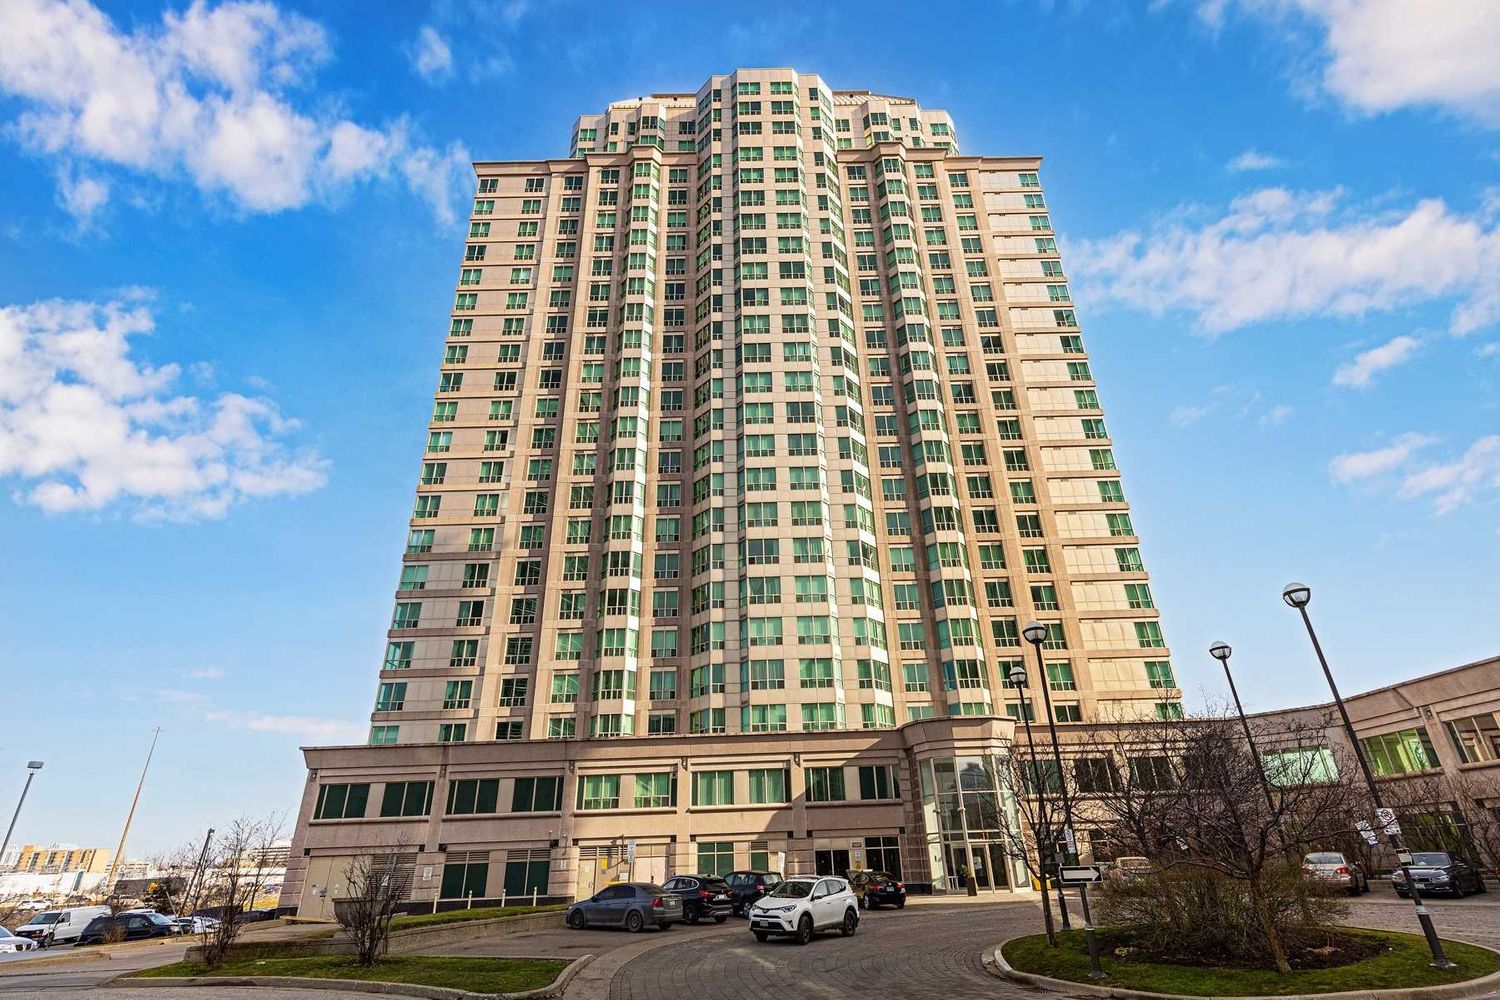 11 Lee Centre Drive. May Tower II Condos is located in  Scarborough, Toronto - image #1 of 2